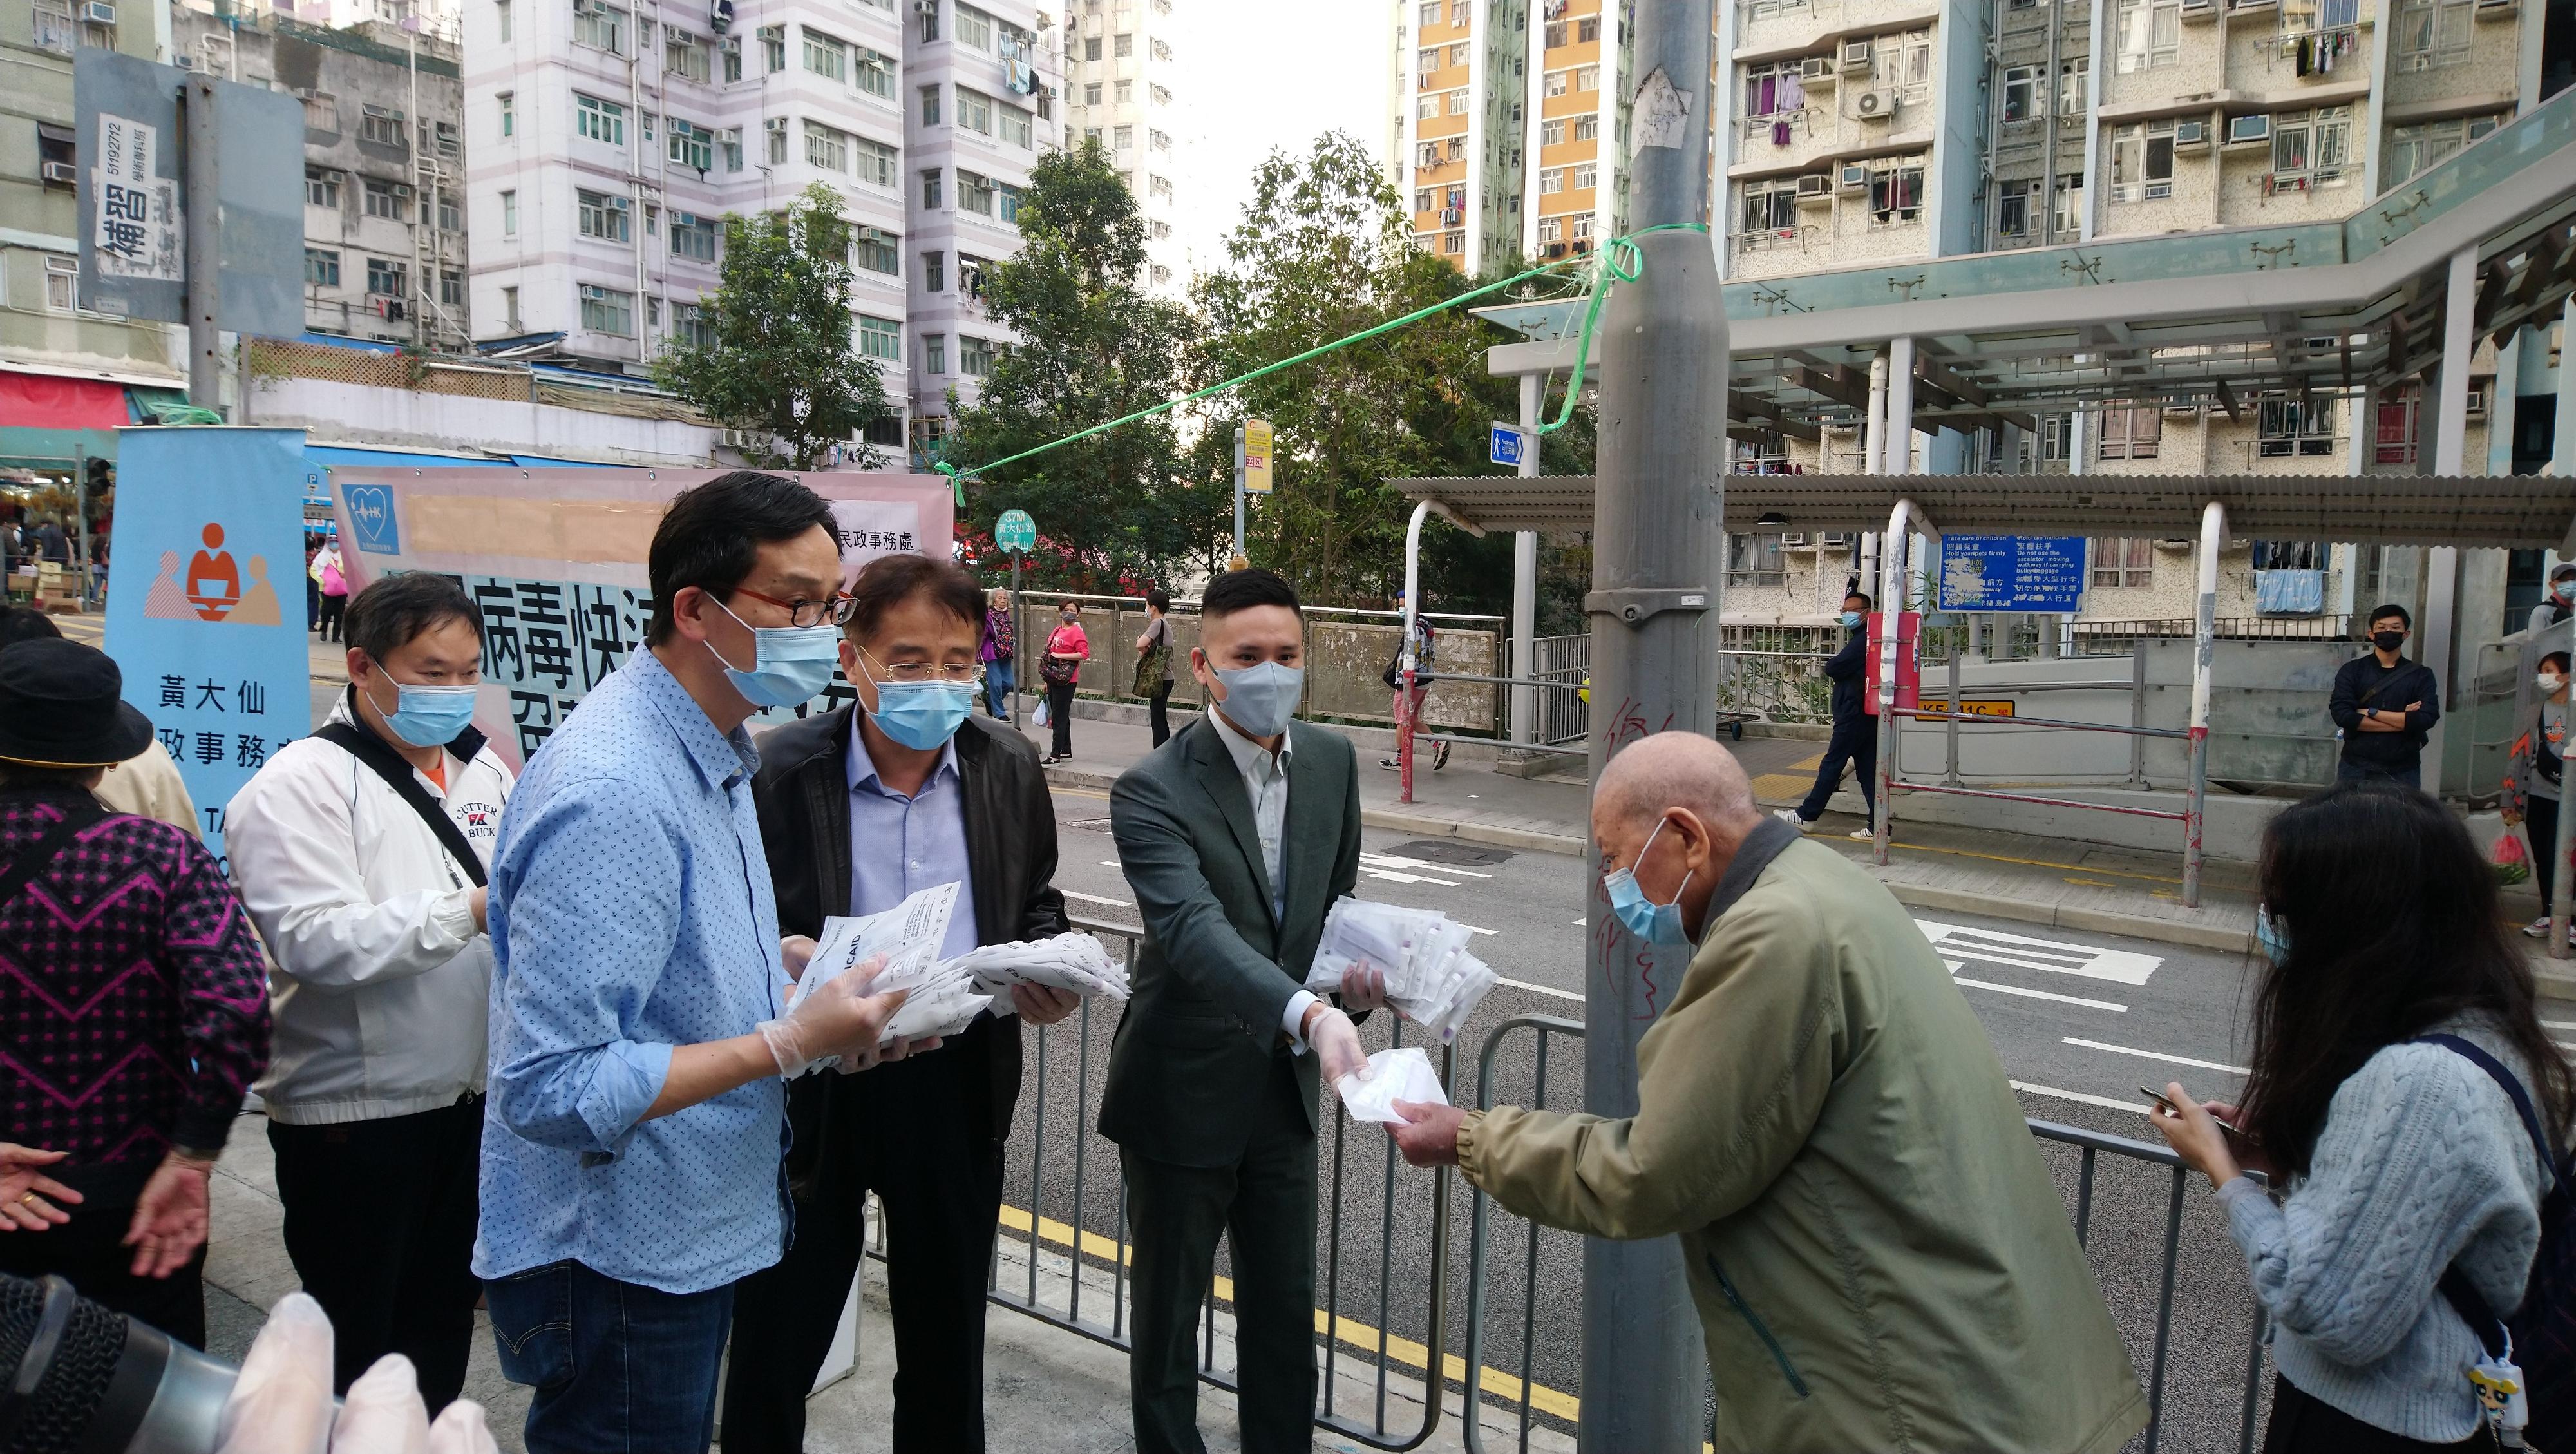 The Home Affairs Department and the Wong Tai Sin District Office today (January 27) distributes COVID-19 rapid test kits to residents in Wong Tai Sin District.